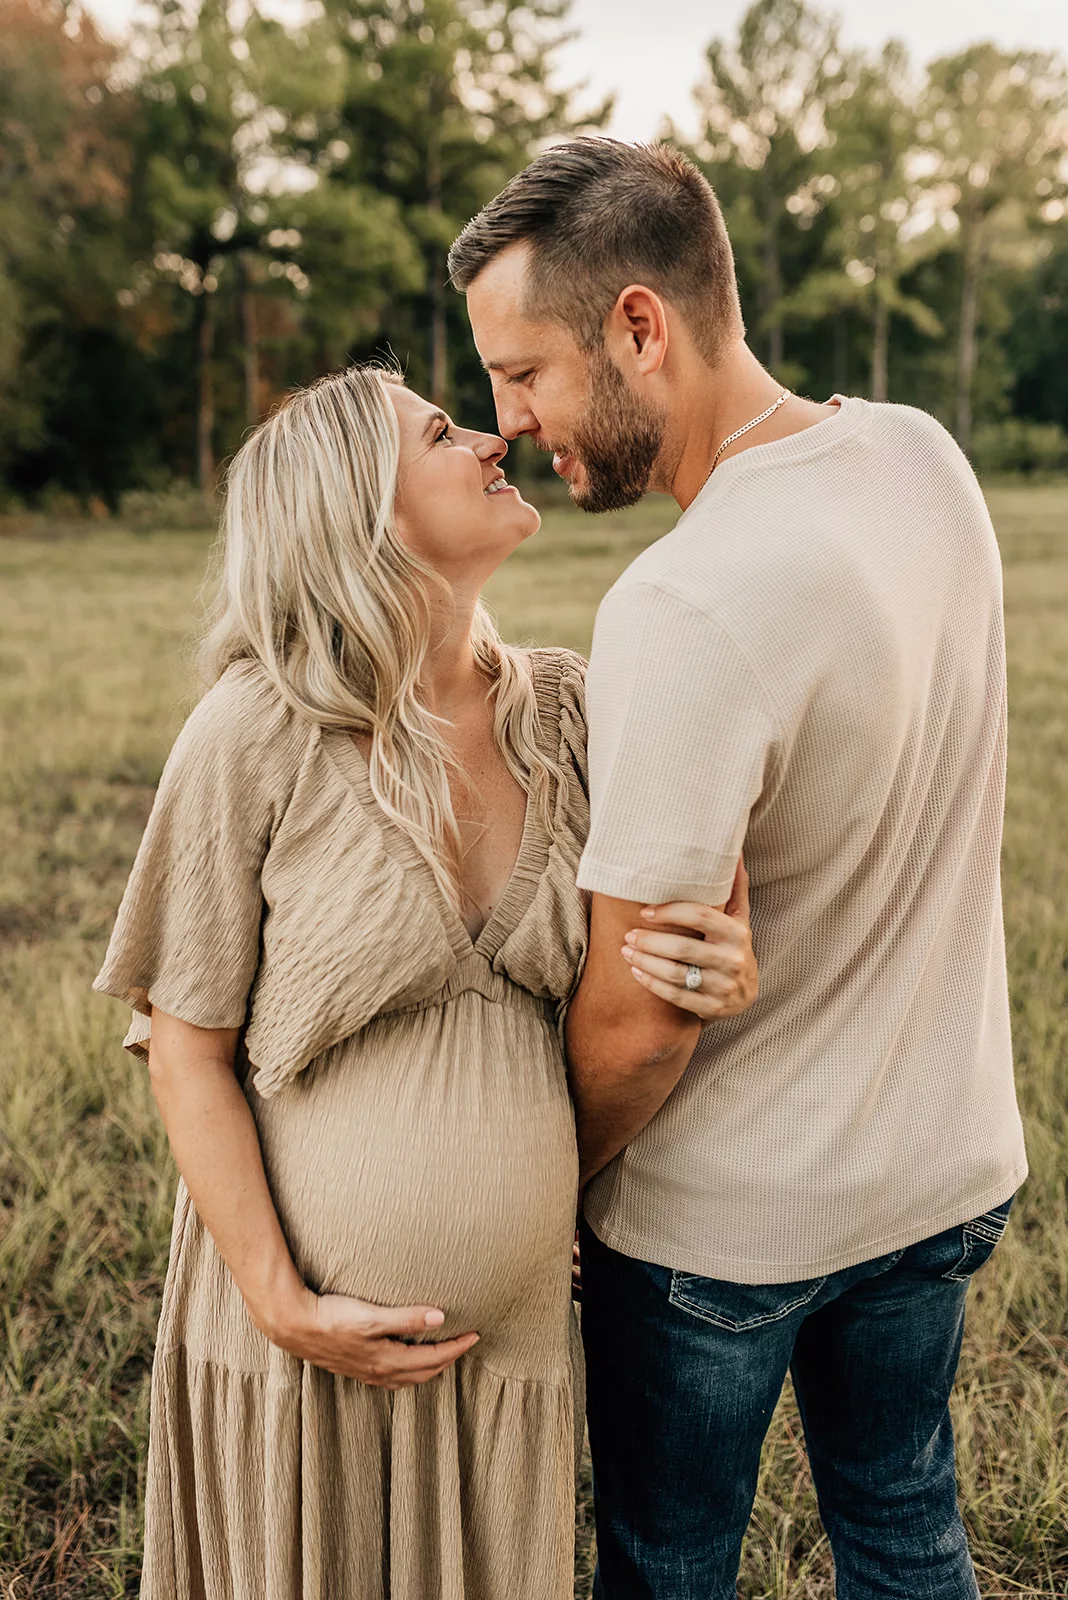 Expecting parents lean in for a kiss and hold the bump while standing in a field at sunset thanks to Houston Fertility Clinics